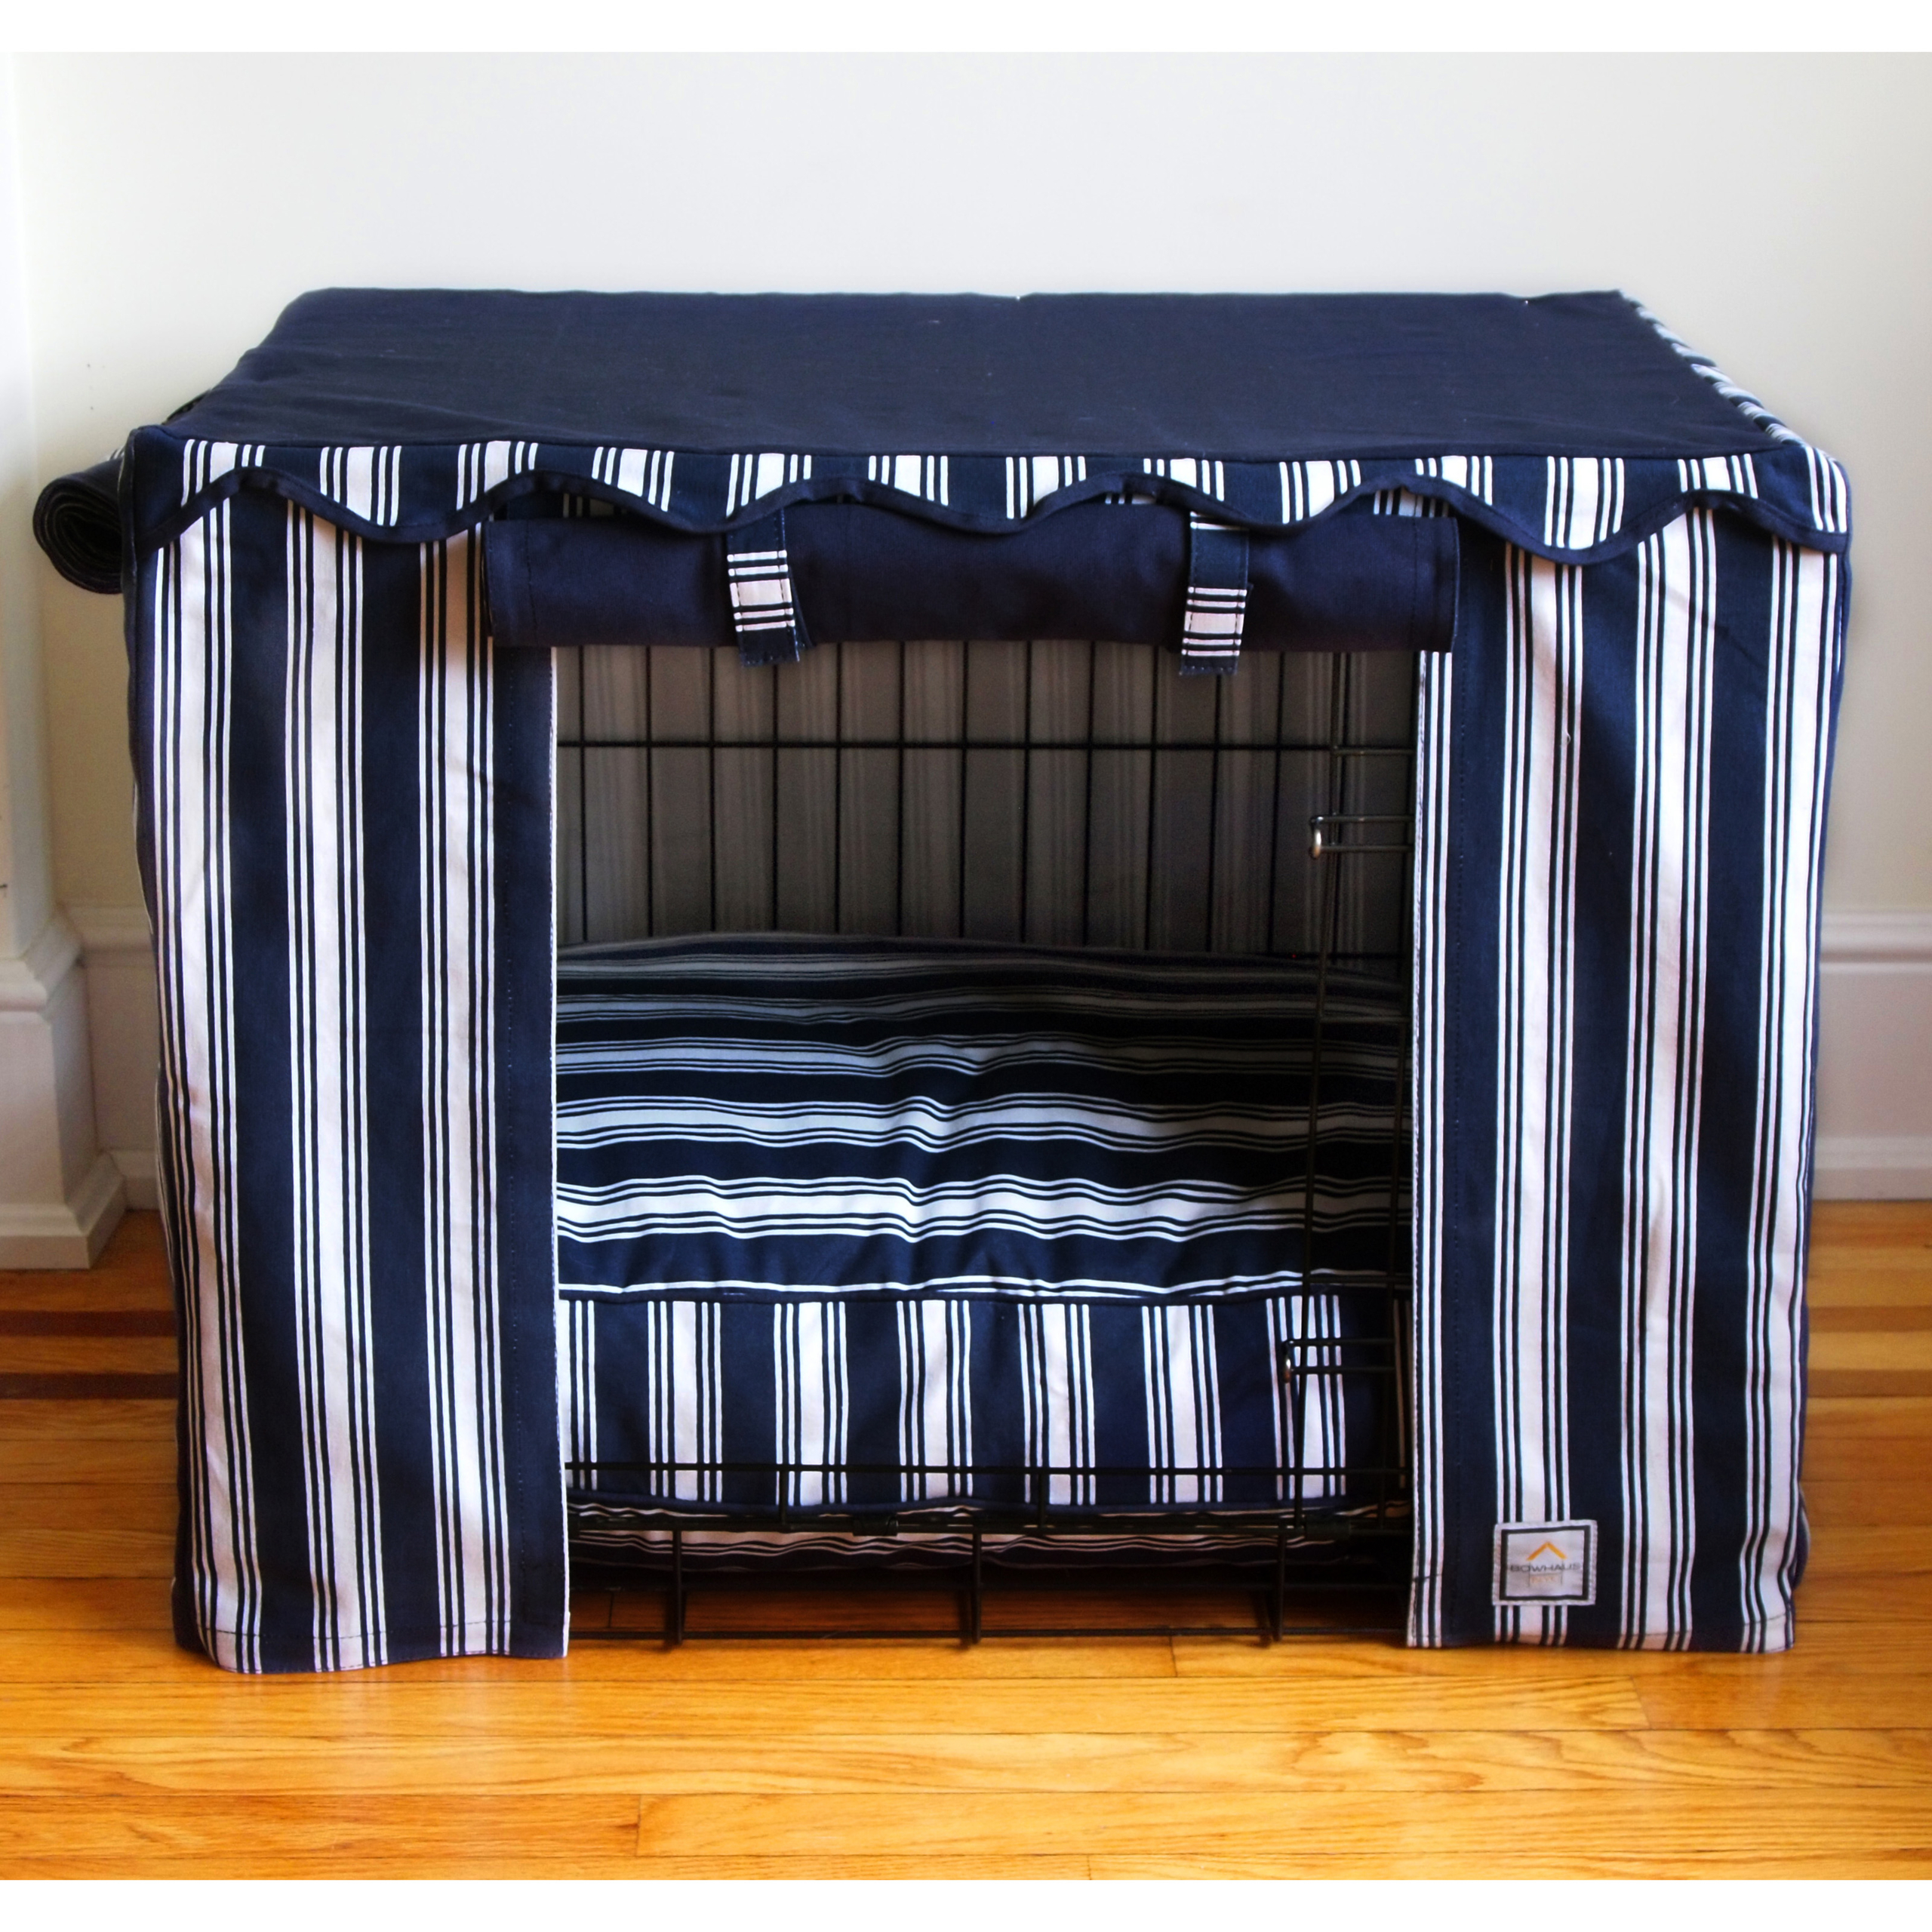 How to make a dog crate cover